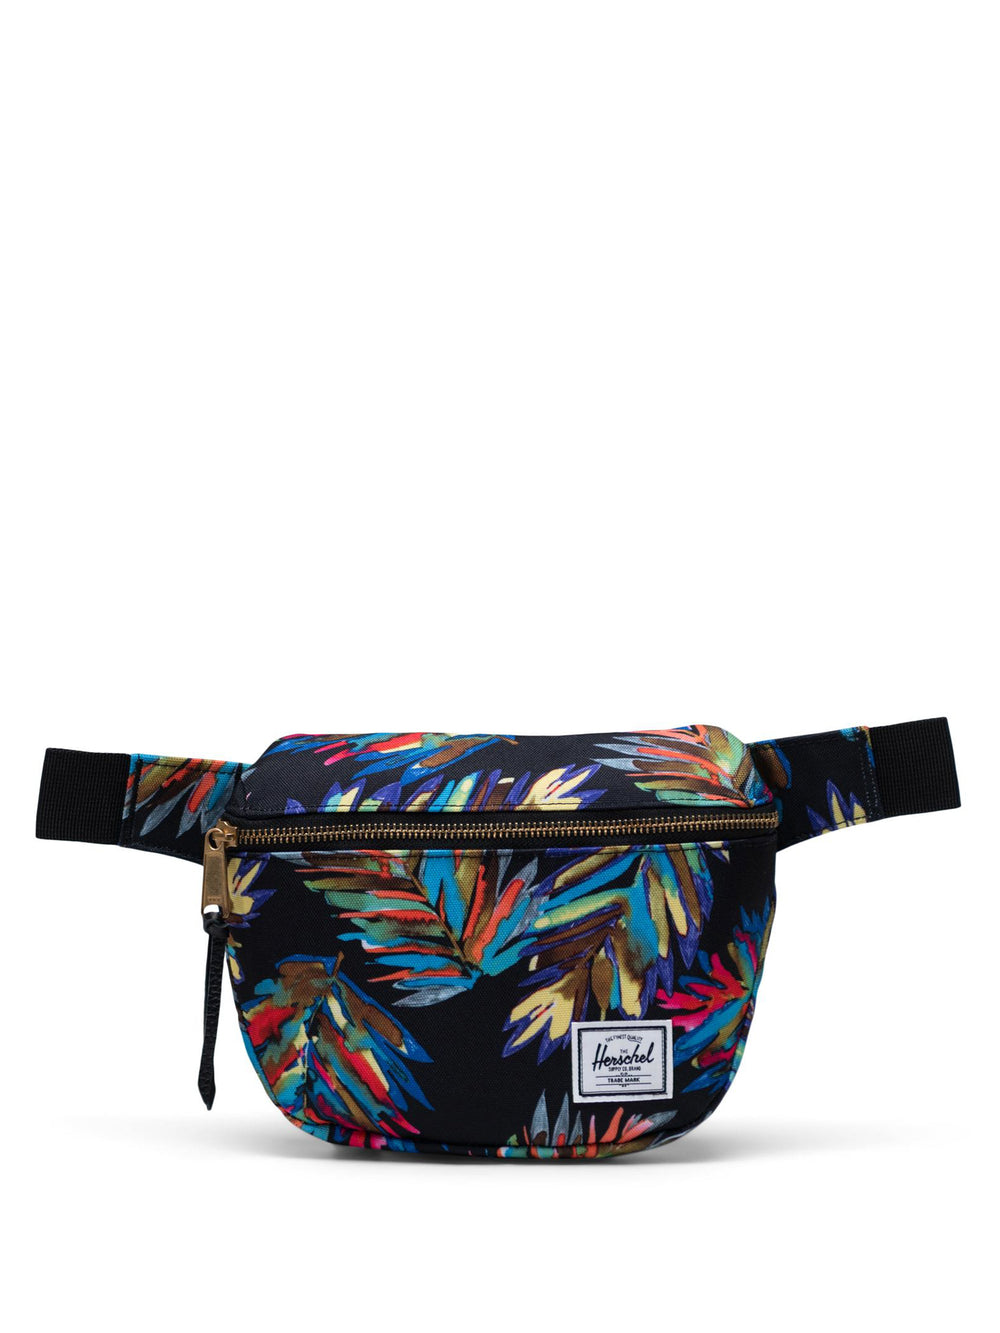 HERSCHEL SUPPLY CO. FIFTEEN PACK - PAINTED PALM - CLEARANCE